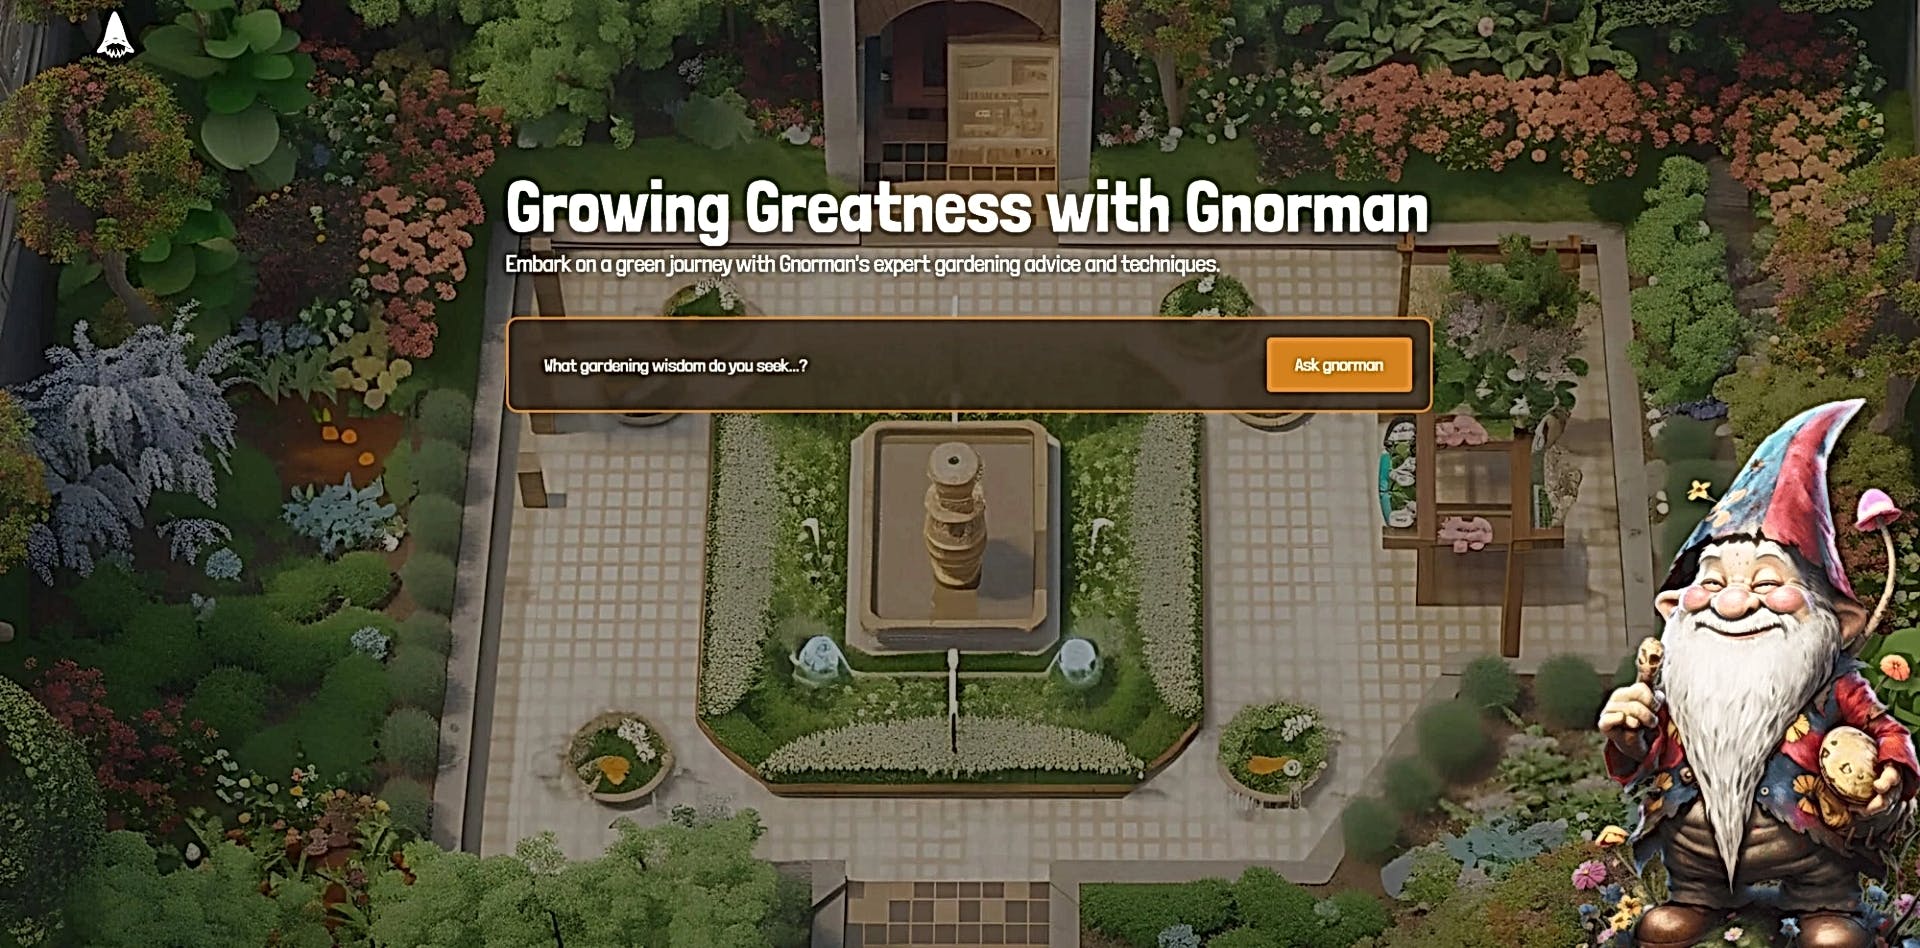 Gnorman featured